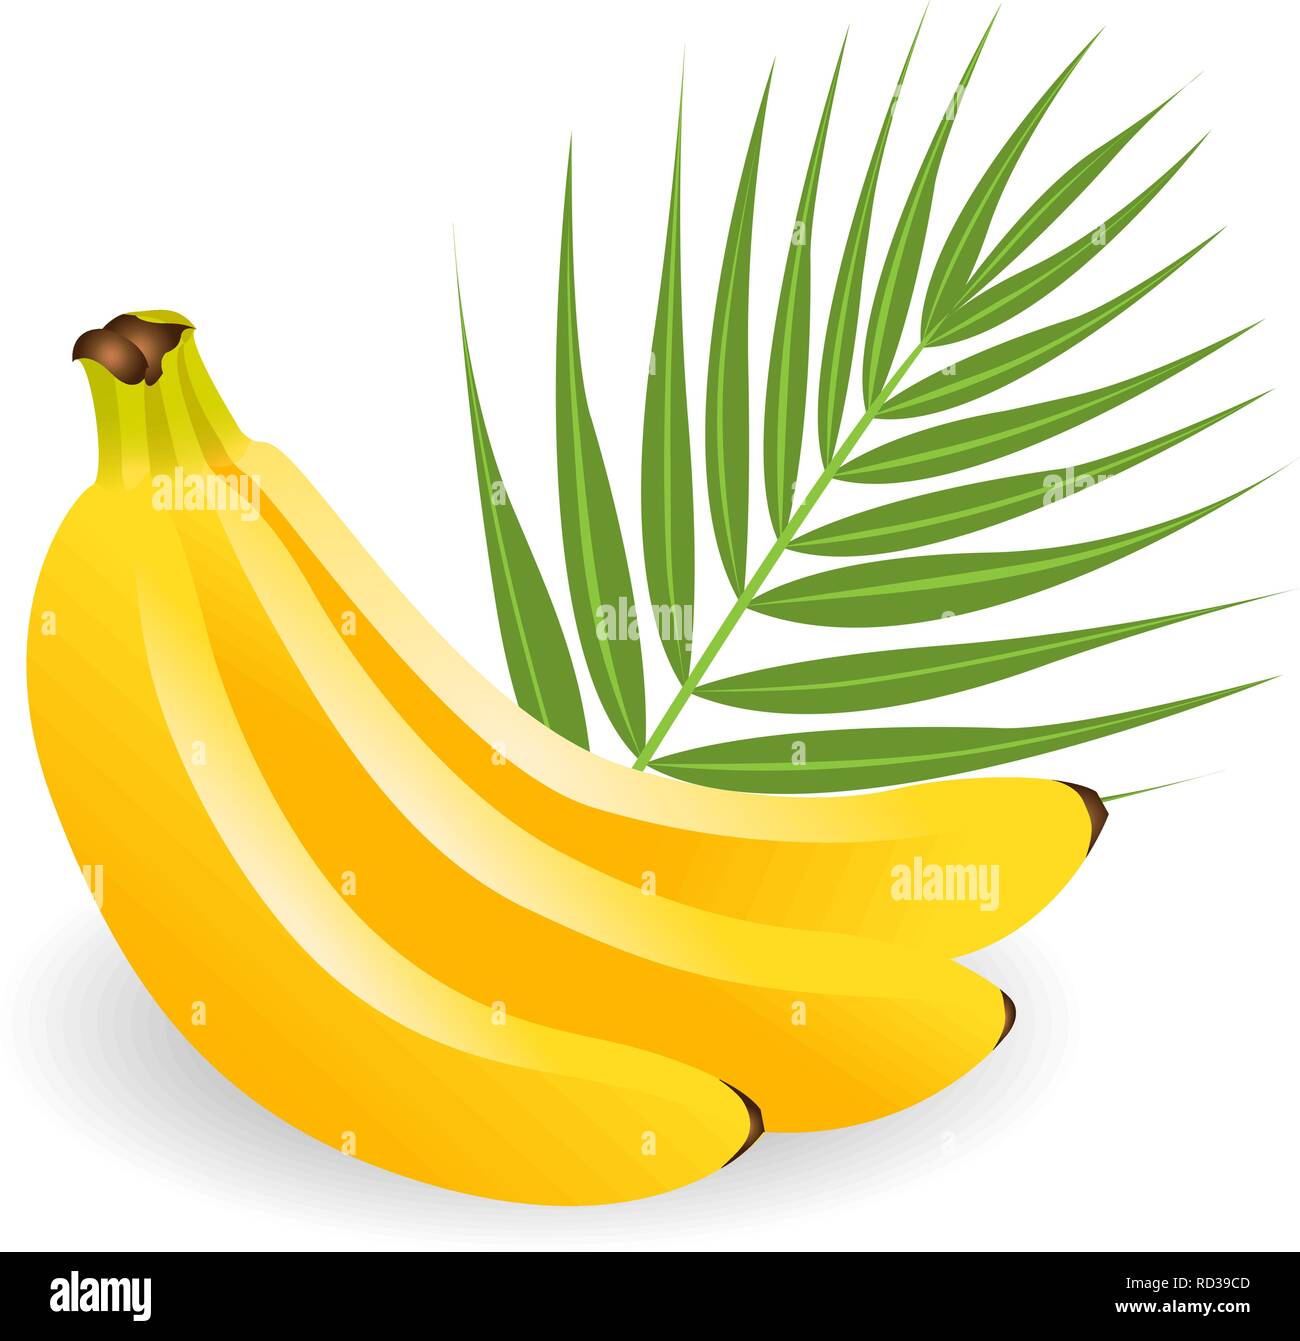 Healthy, yellow tropical fruits. Ripe, juicy bananas with green leaves. Summer fruits for healthy lifestyle. Bananas fruit flat icon isolated on white Stock Vector